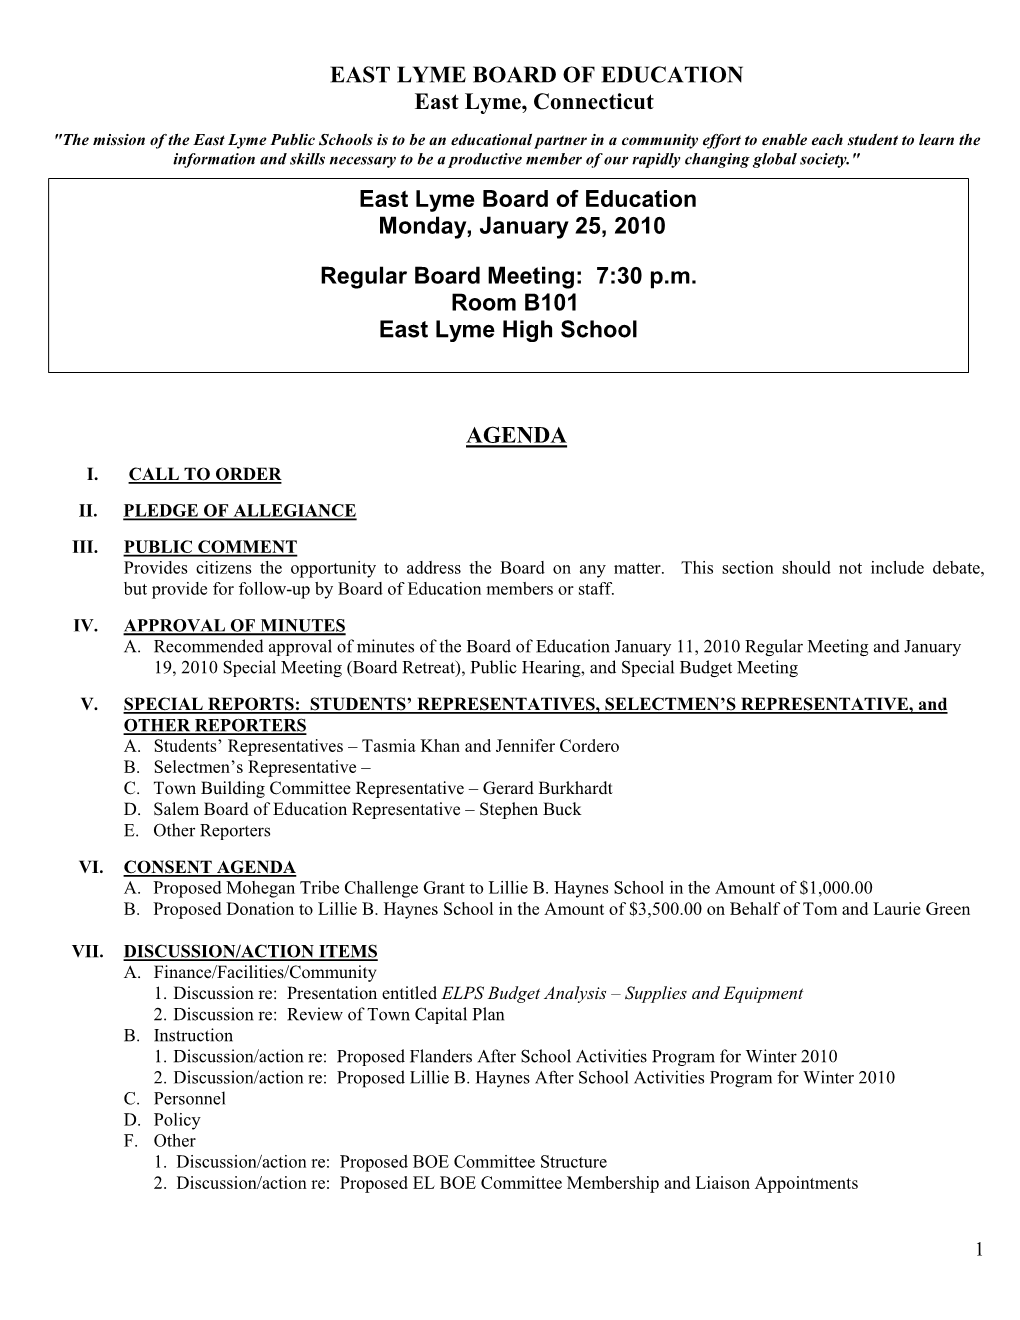 EAST LYME BOARD of EDUCATION East Lyme, Connecticut AGENDA